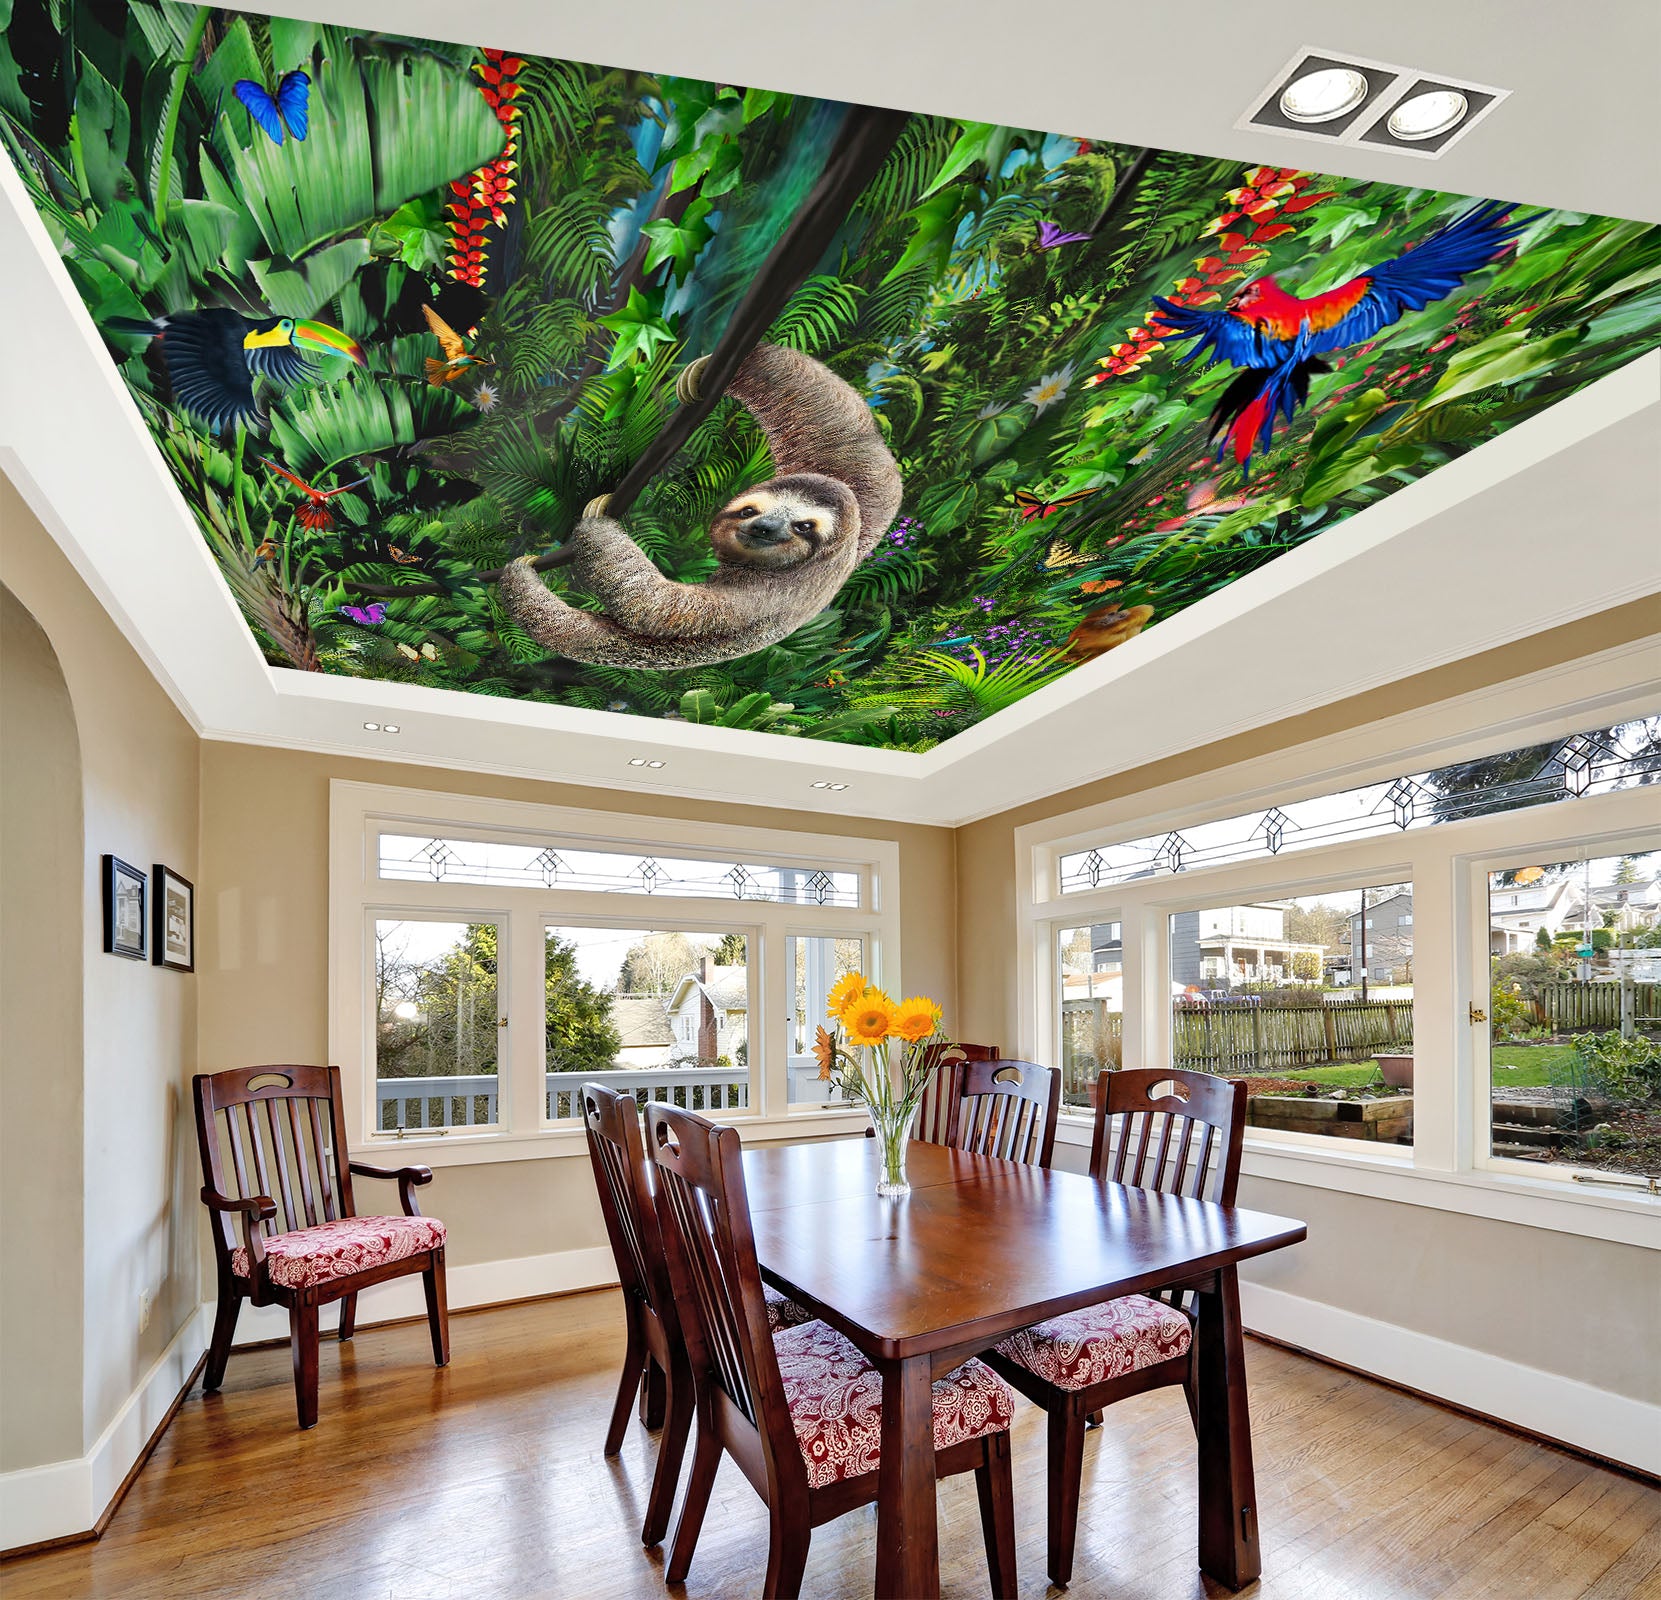 3D Forest Sloth 1010 Adrian Chesterman Ceiling Wallpaper Murals